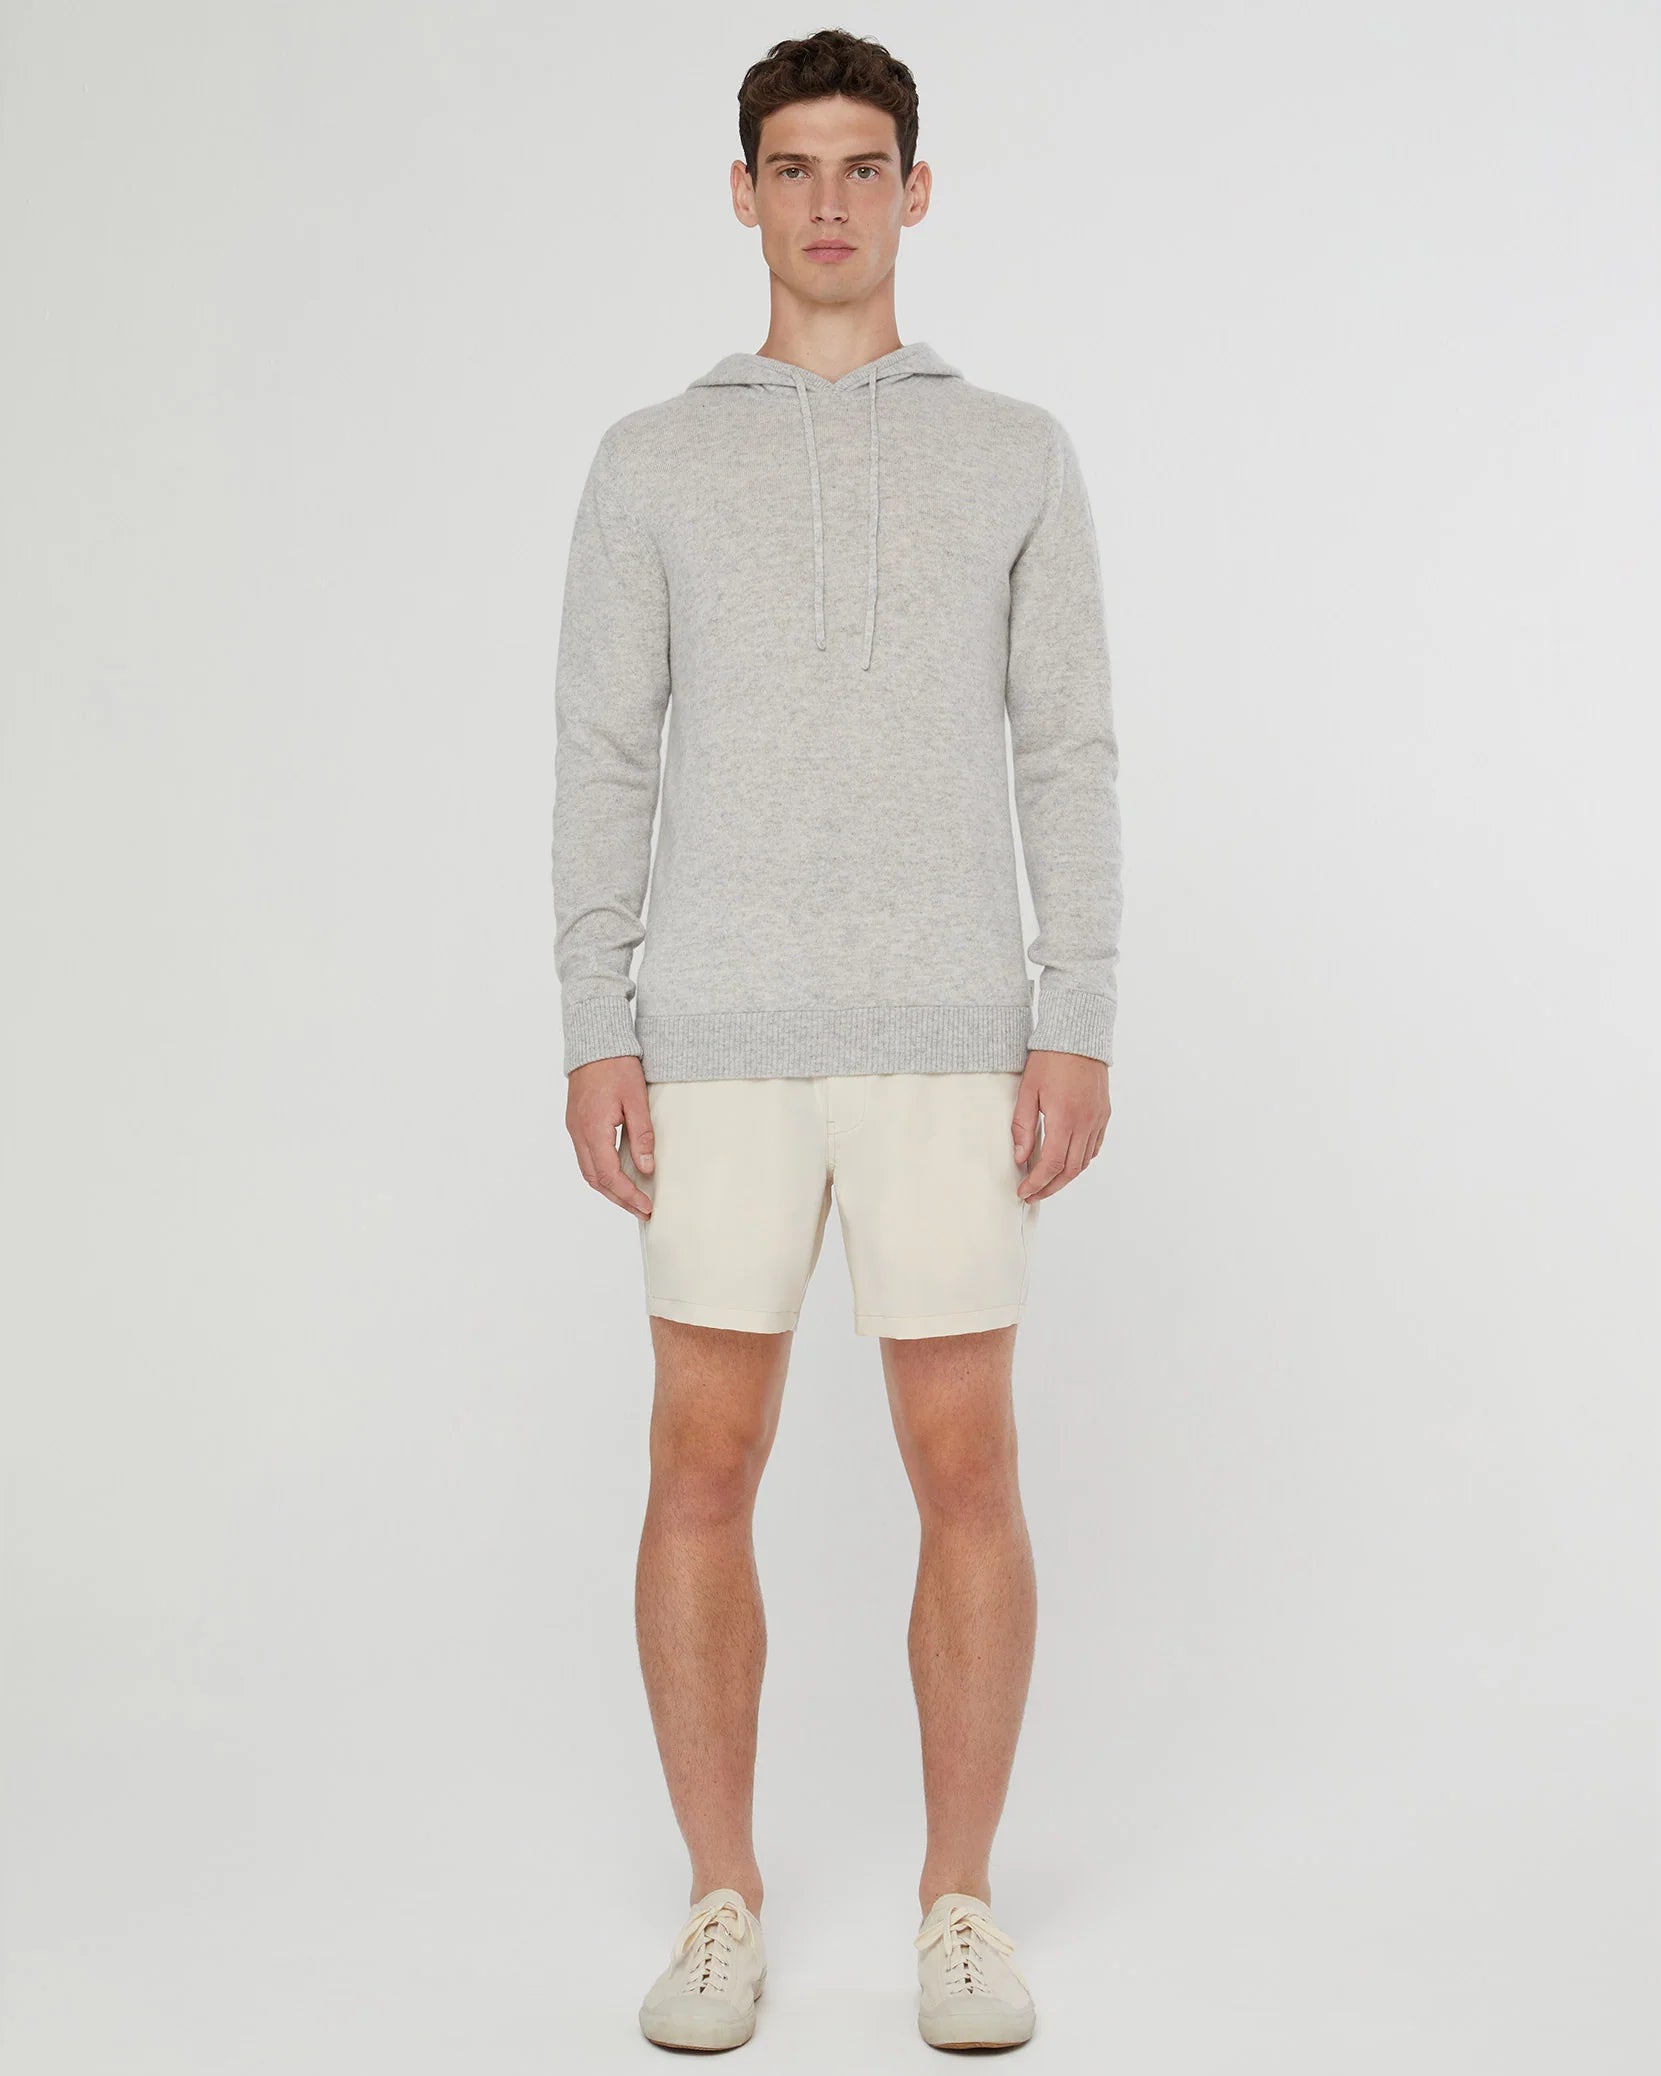 Cashmere Hooded Pullover - Heather Grey